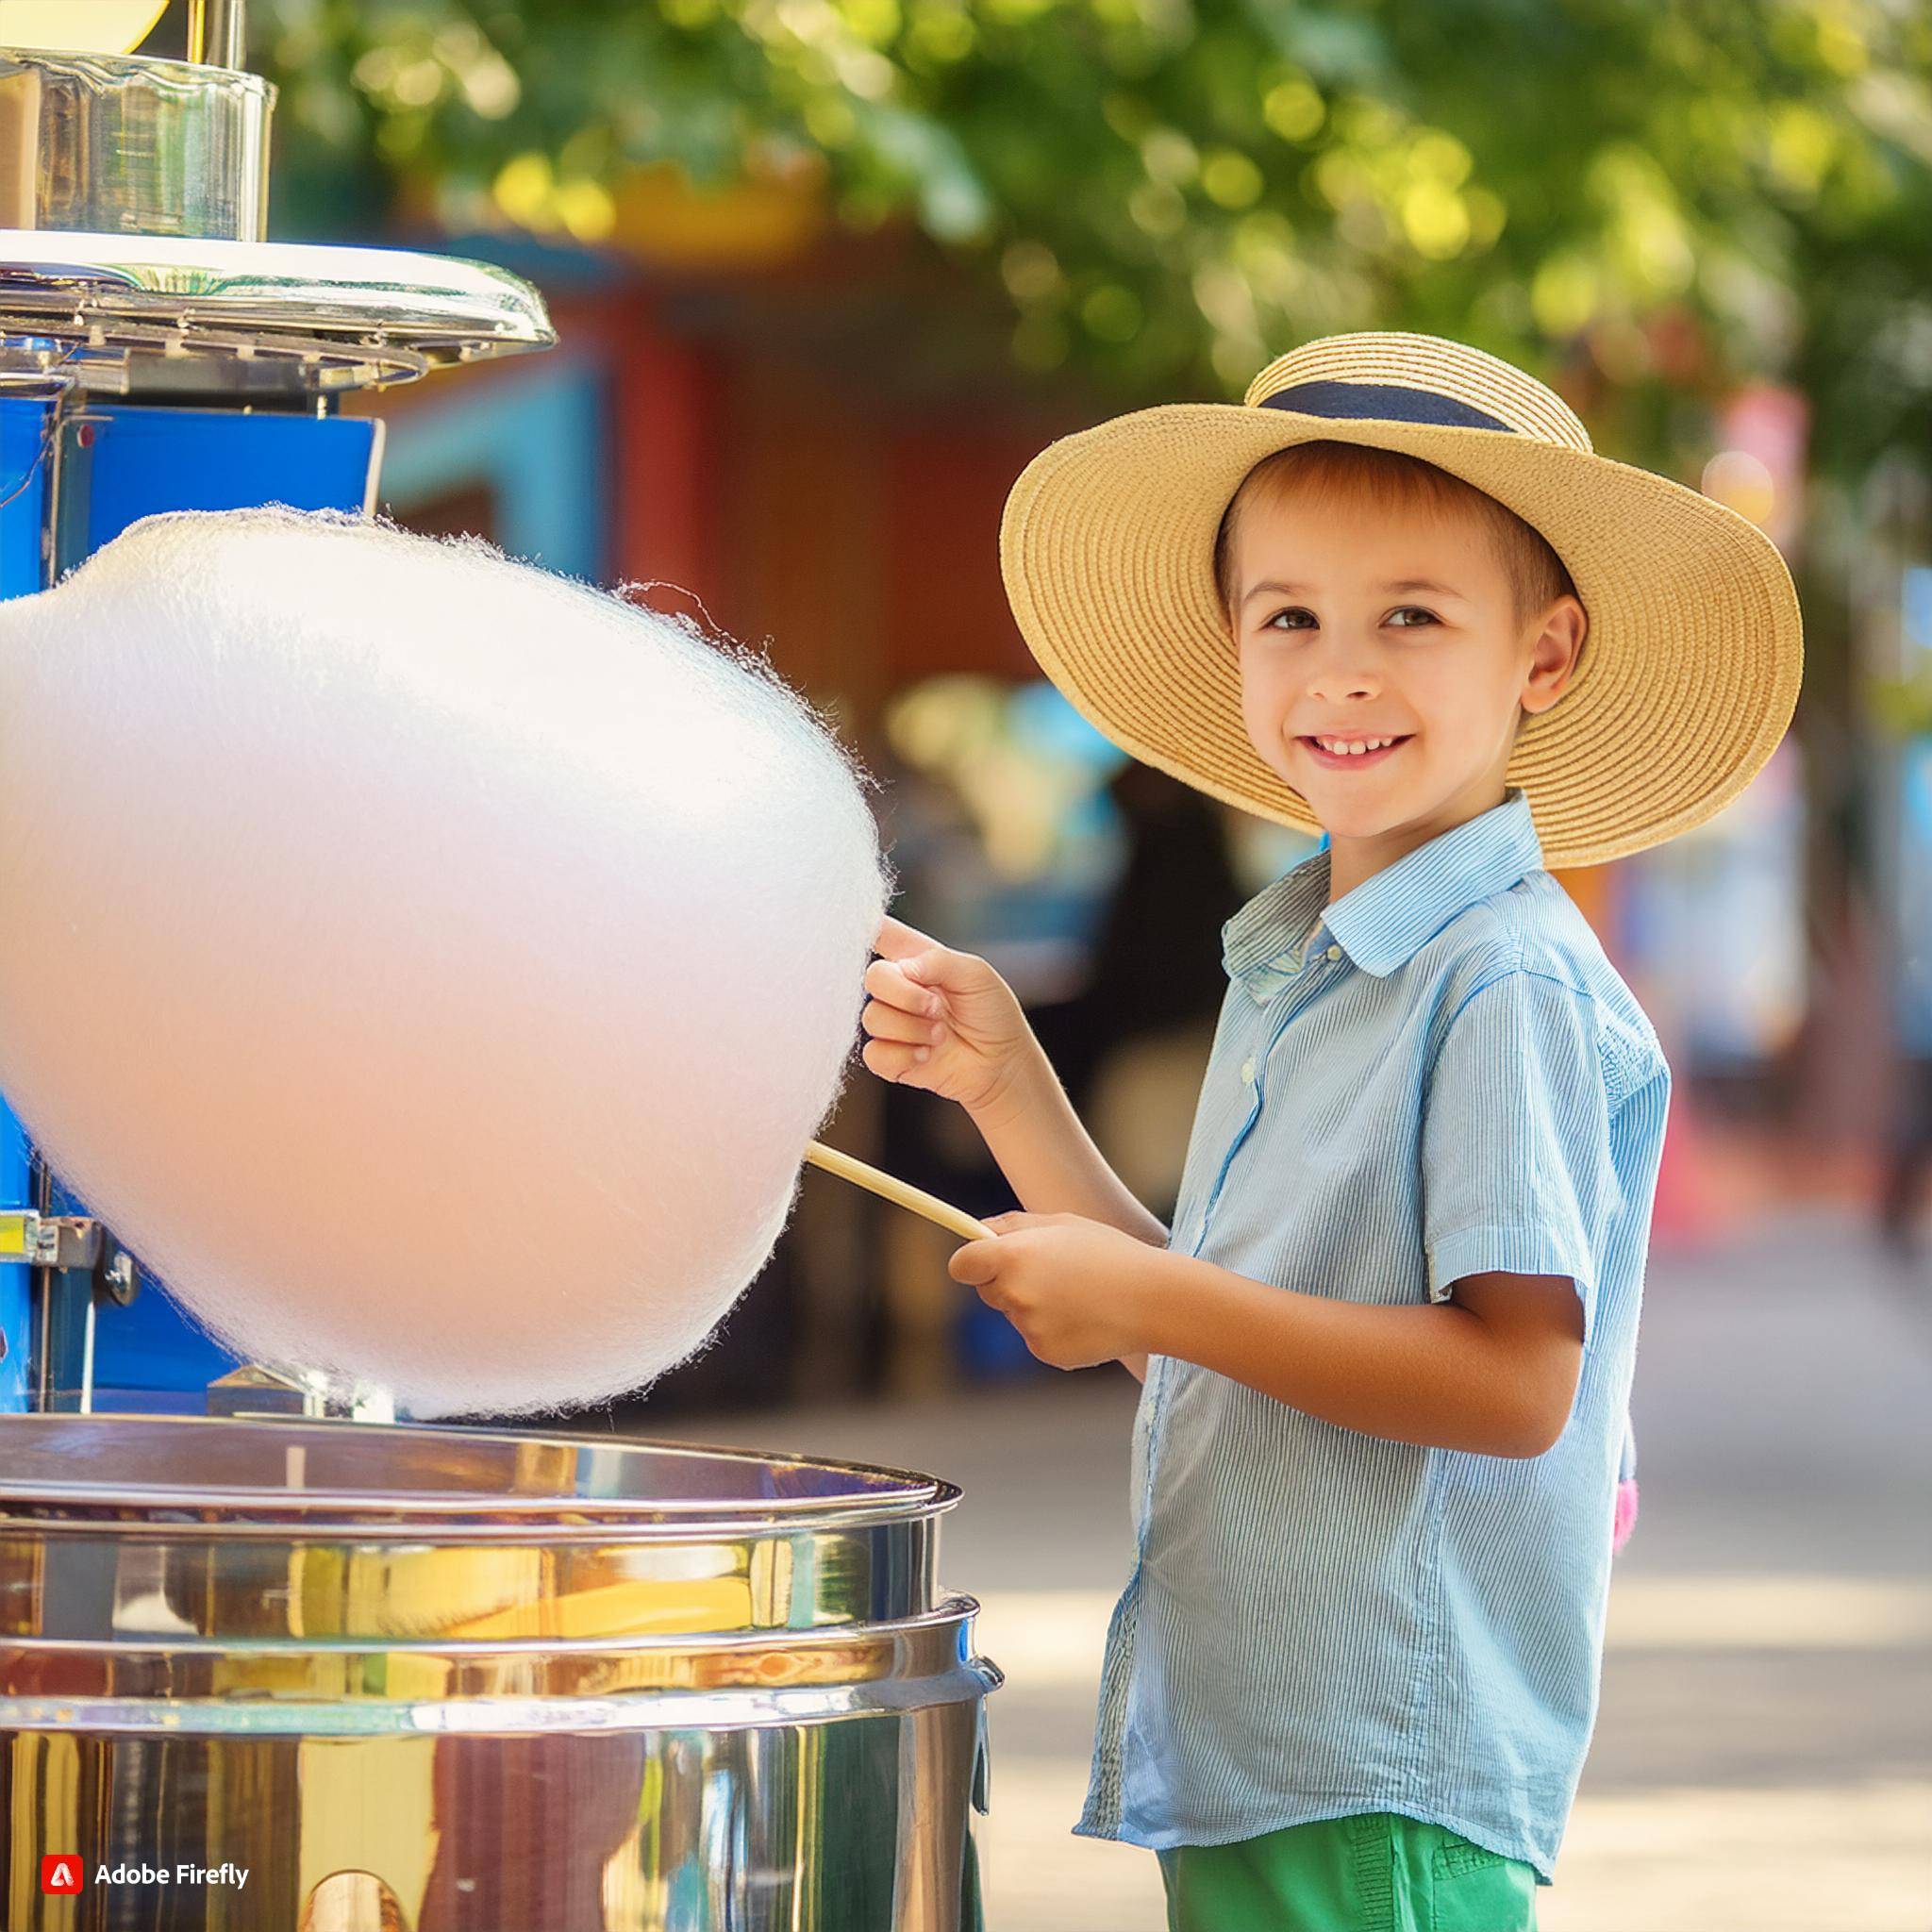 Firefly A real picture of a sweet boy with a wide-brimmed sun hat making cotton candy, the boy...jpg